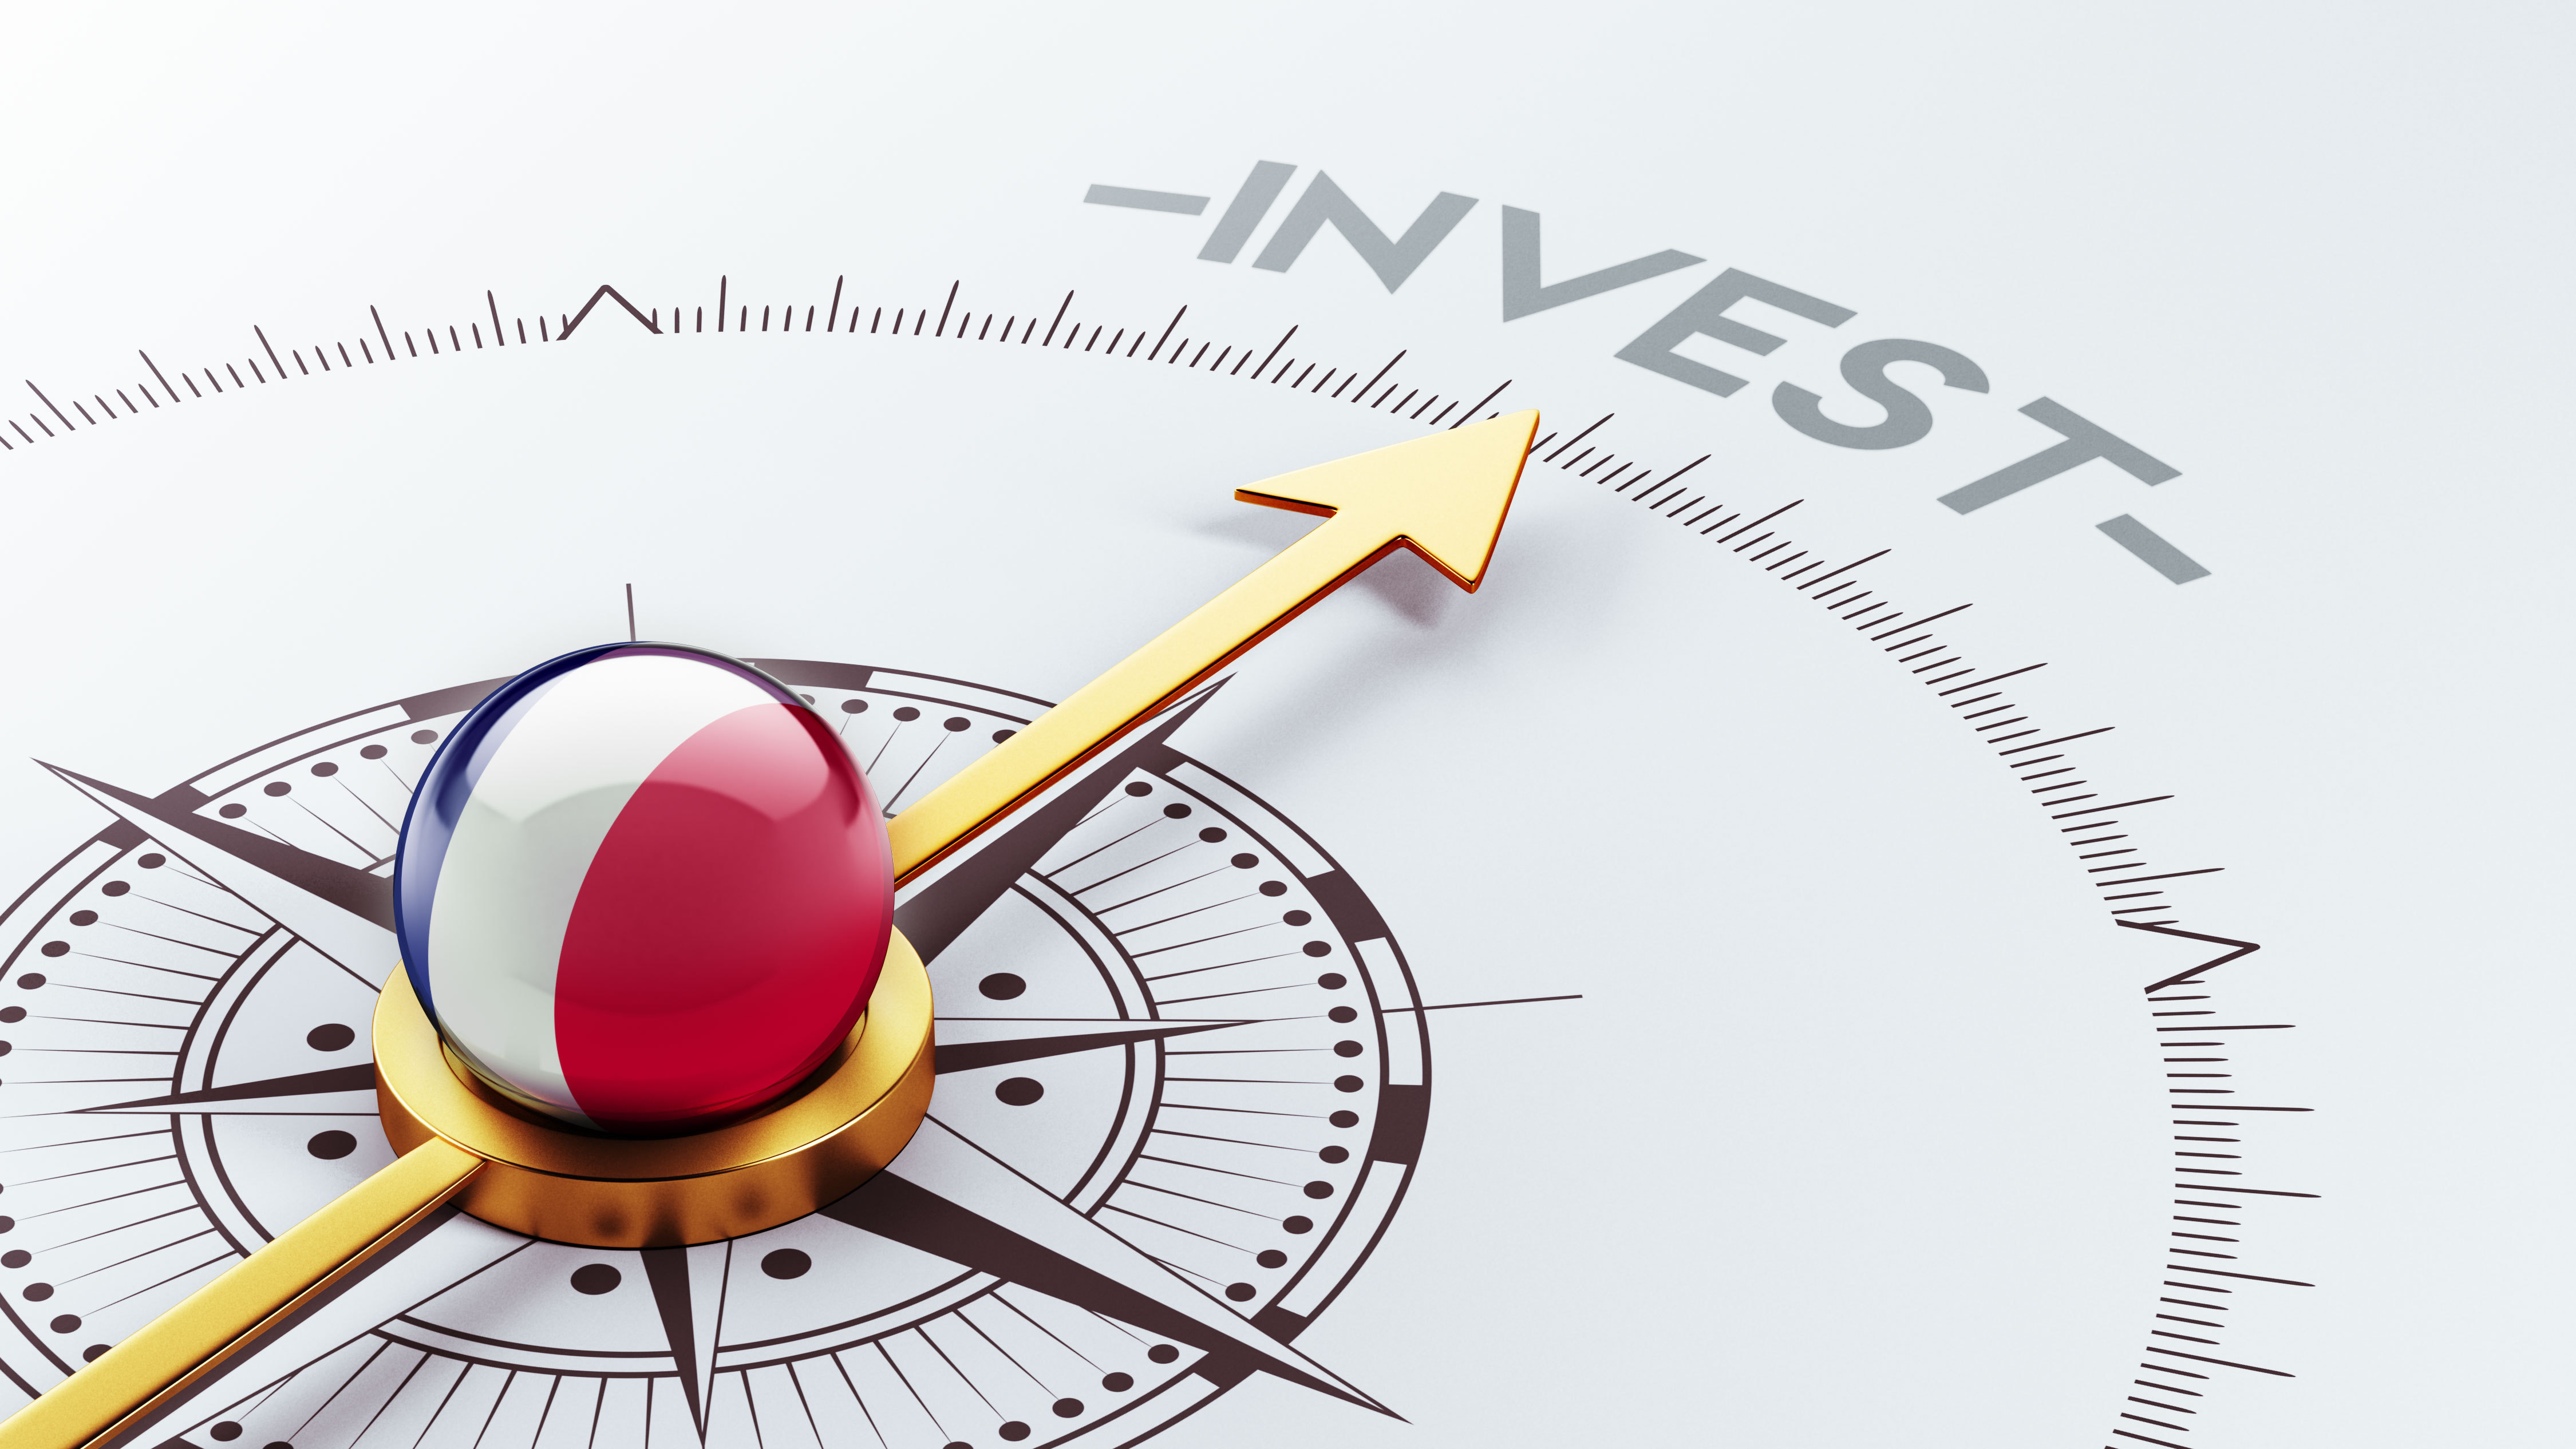 RIGHT INVESTMENTS THAT CANNOT GO WRONG